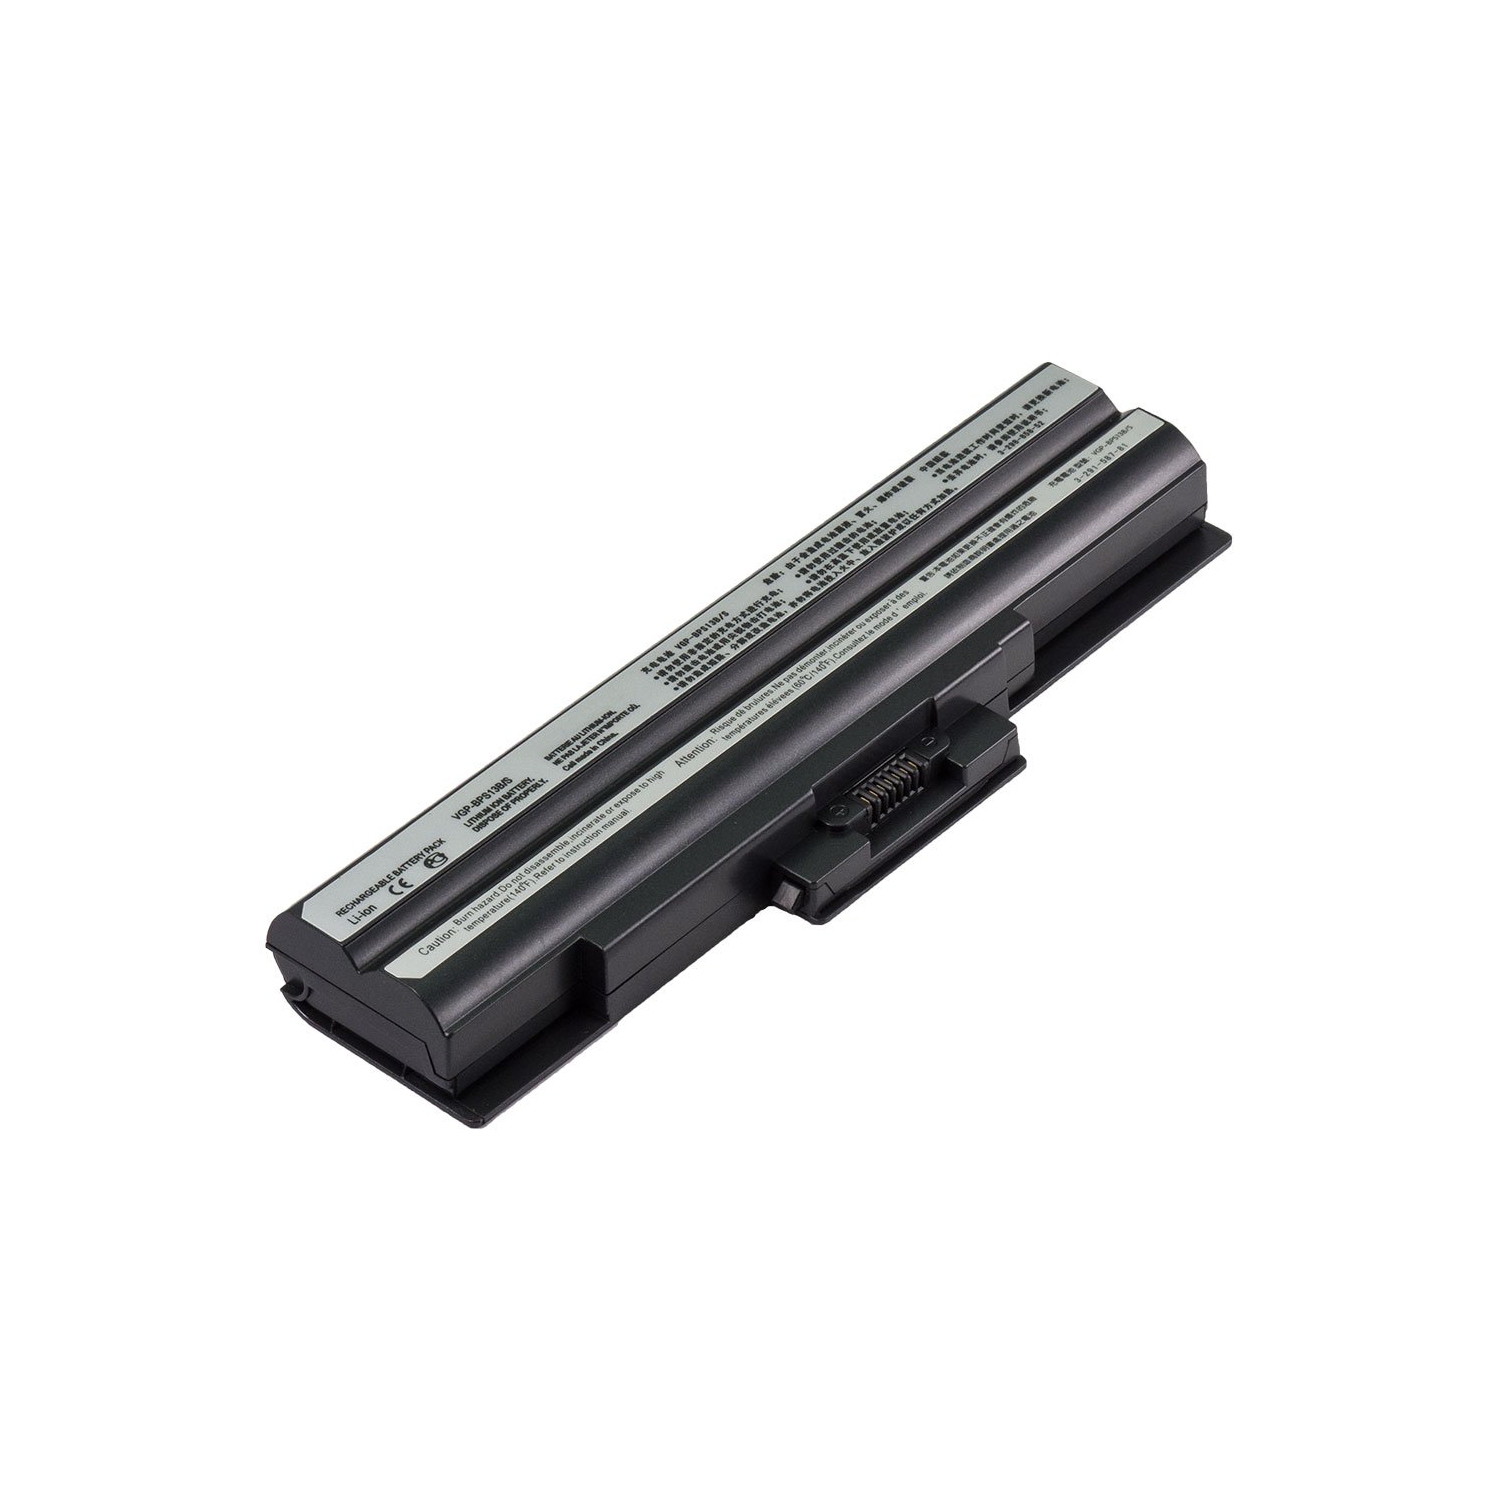 Laptop Battery Replacement for Sony VAIO VGN-CS107E/P, VGP-BPS13, VGP-BPS13/S, VGP-BPS13A/Q, VGP-BPS13B/B, VGP-BSP13/S